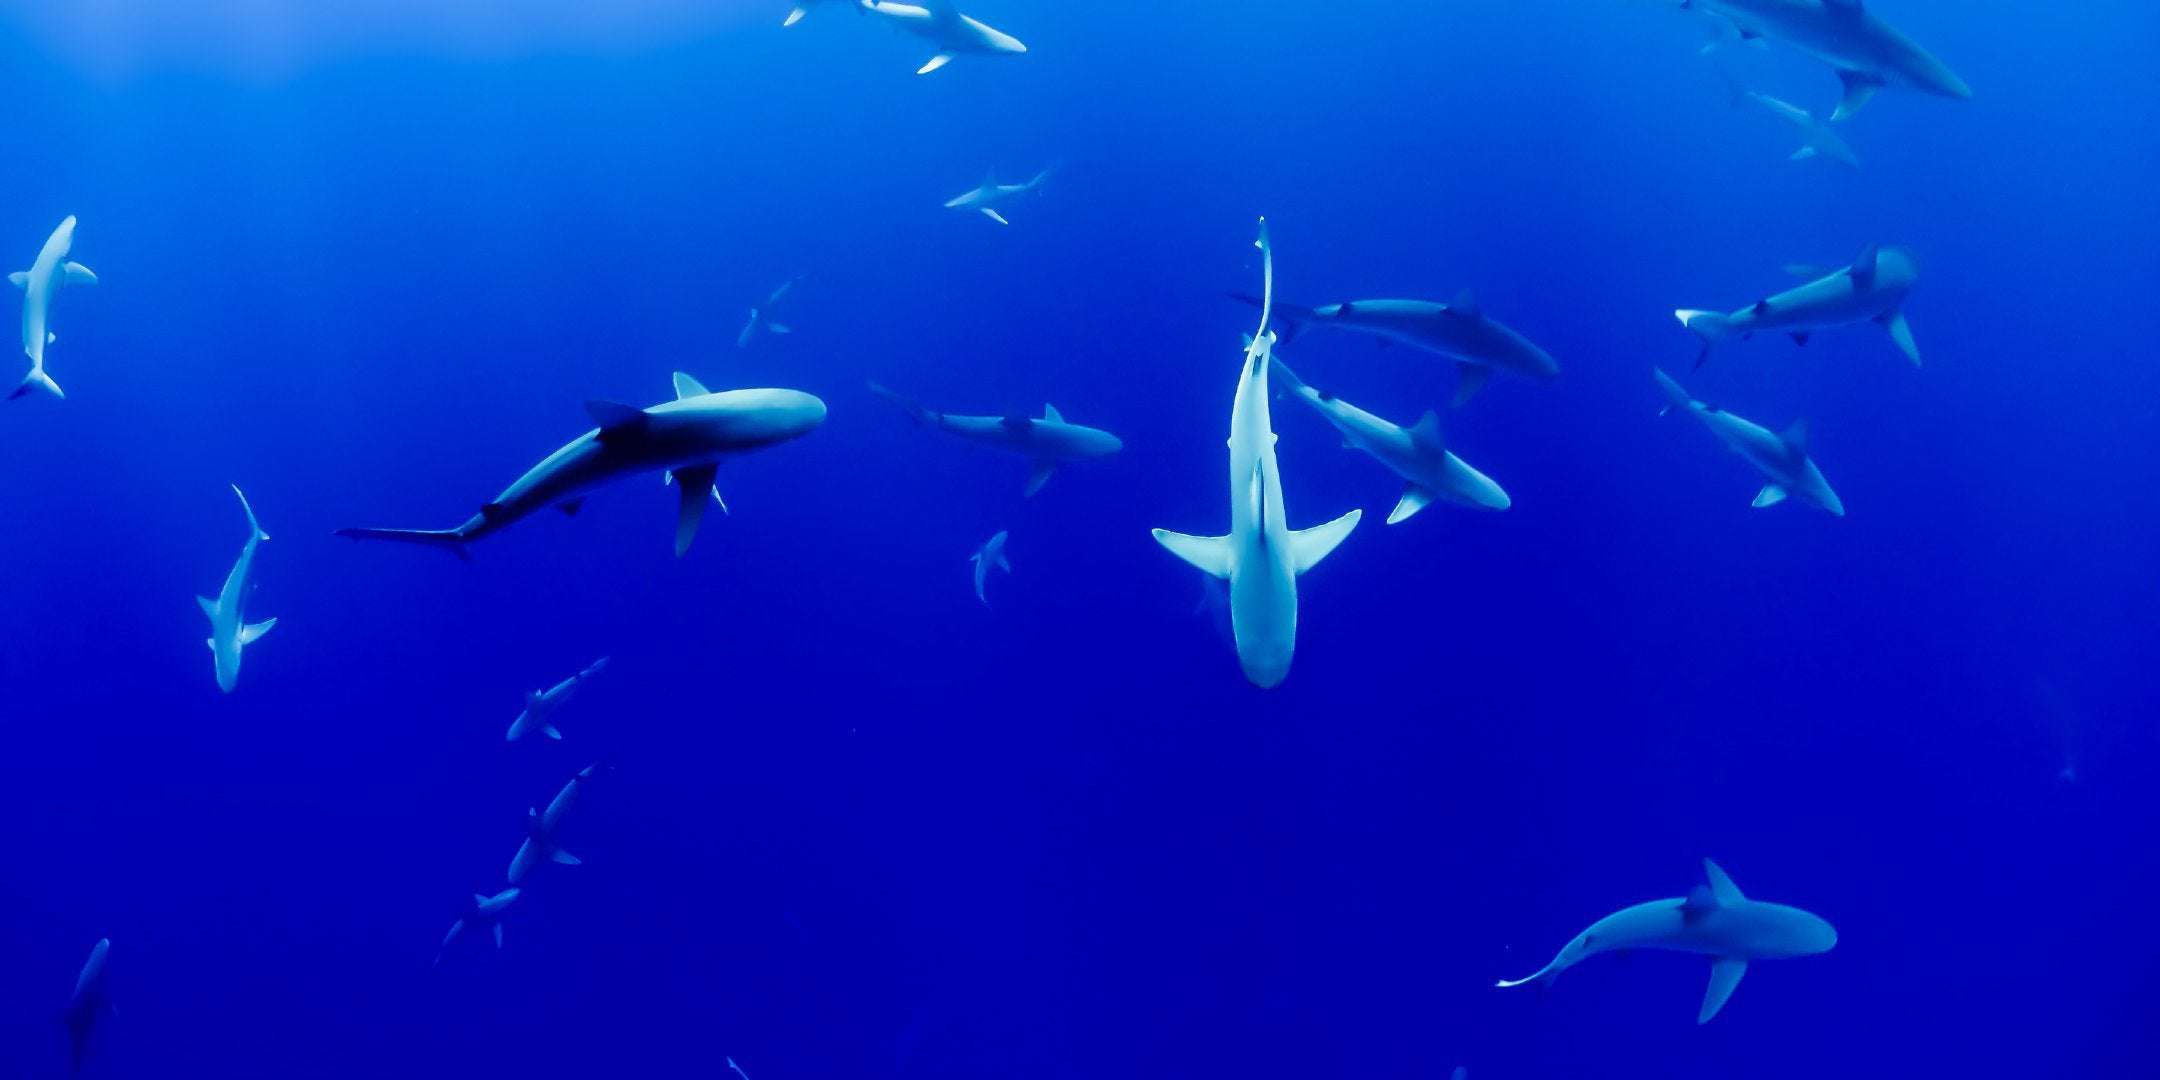 image for Ten interesting facts about sharks